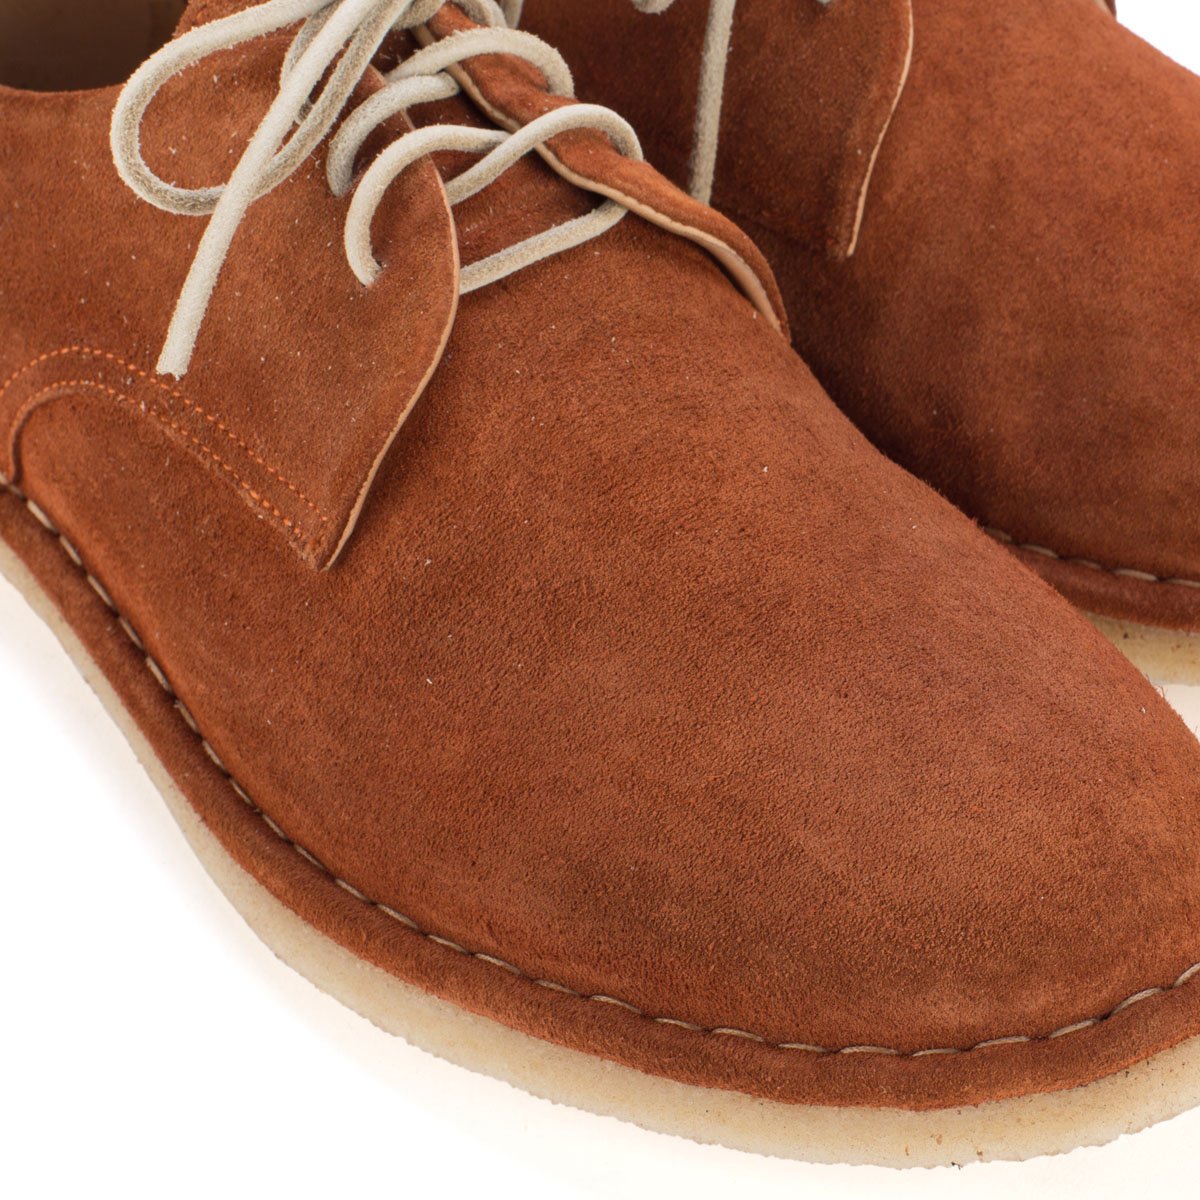 HAND 04 SUEDE – Tan